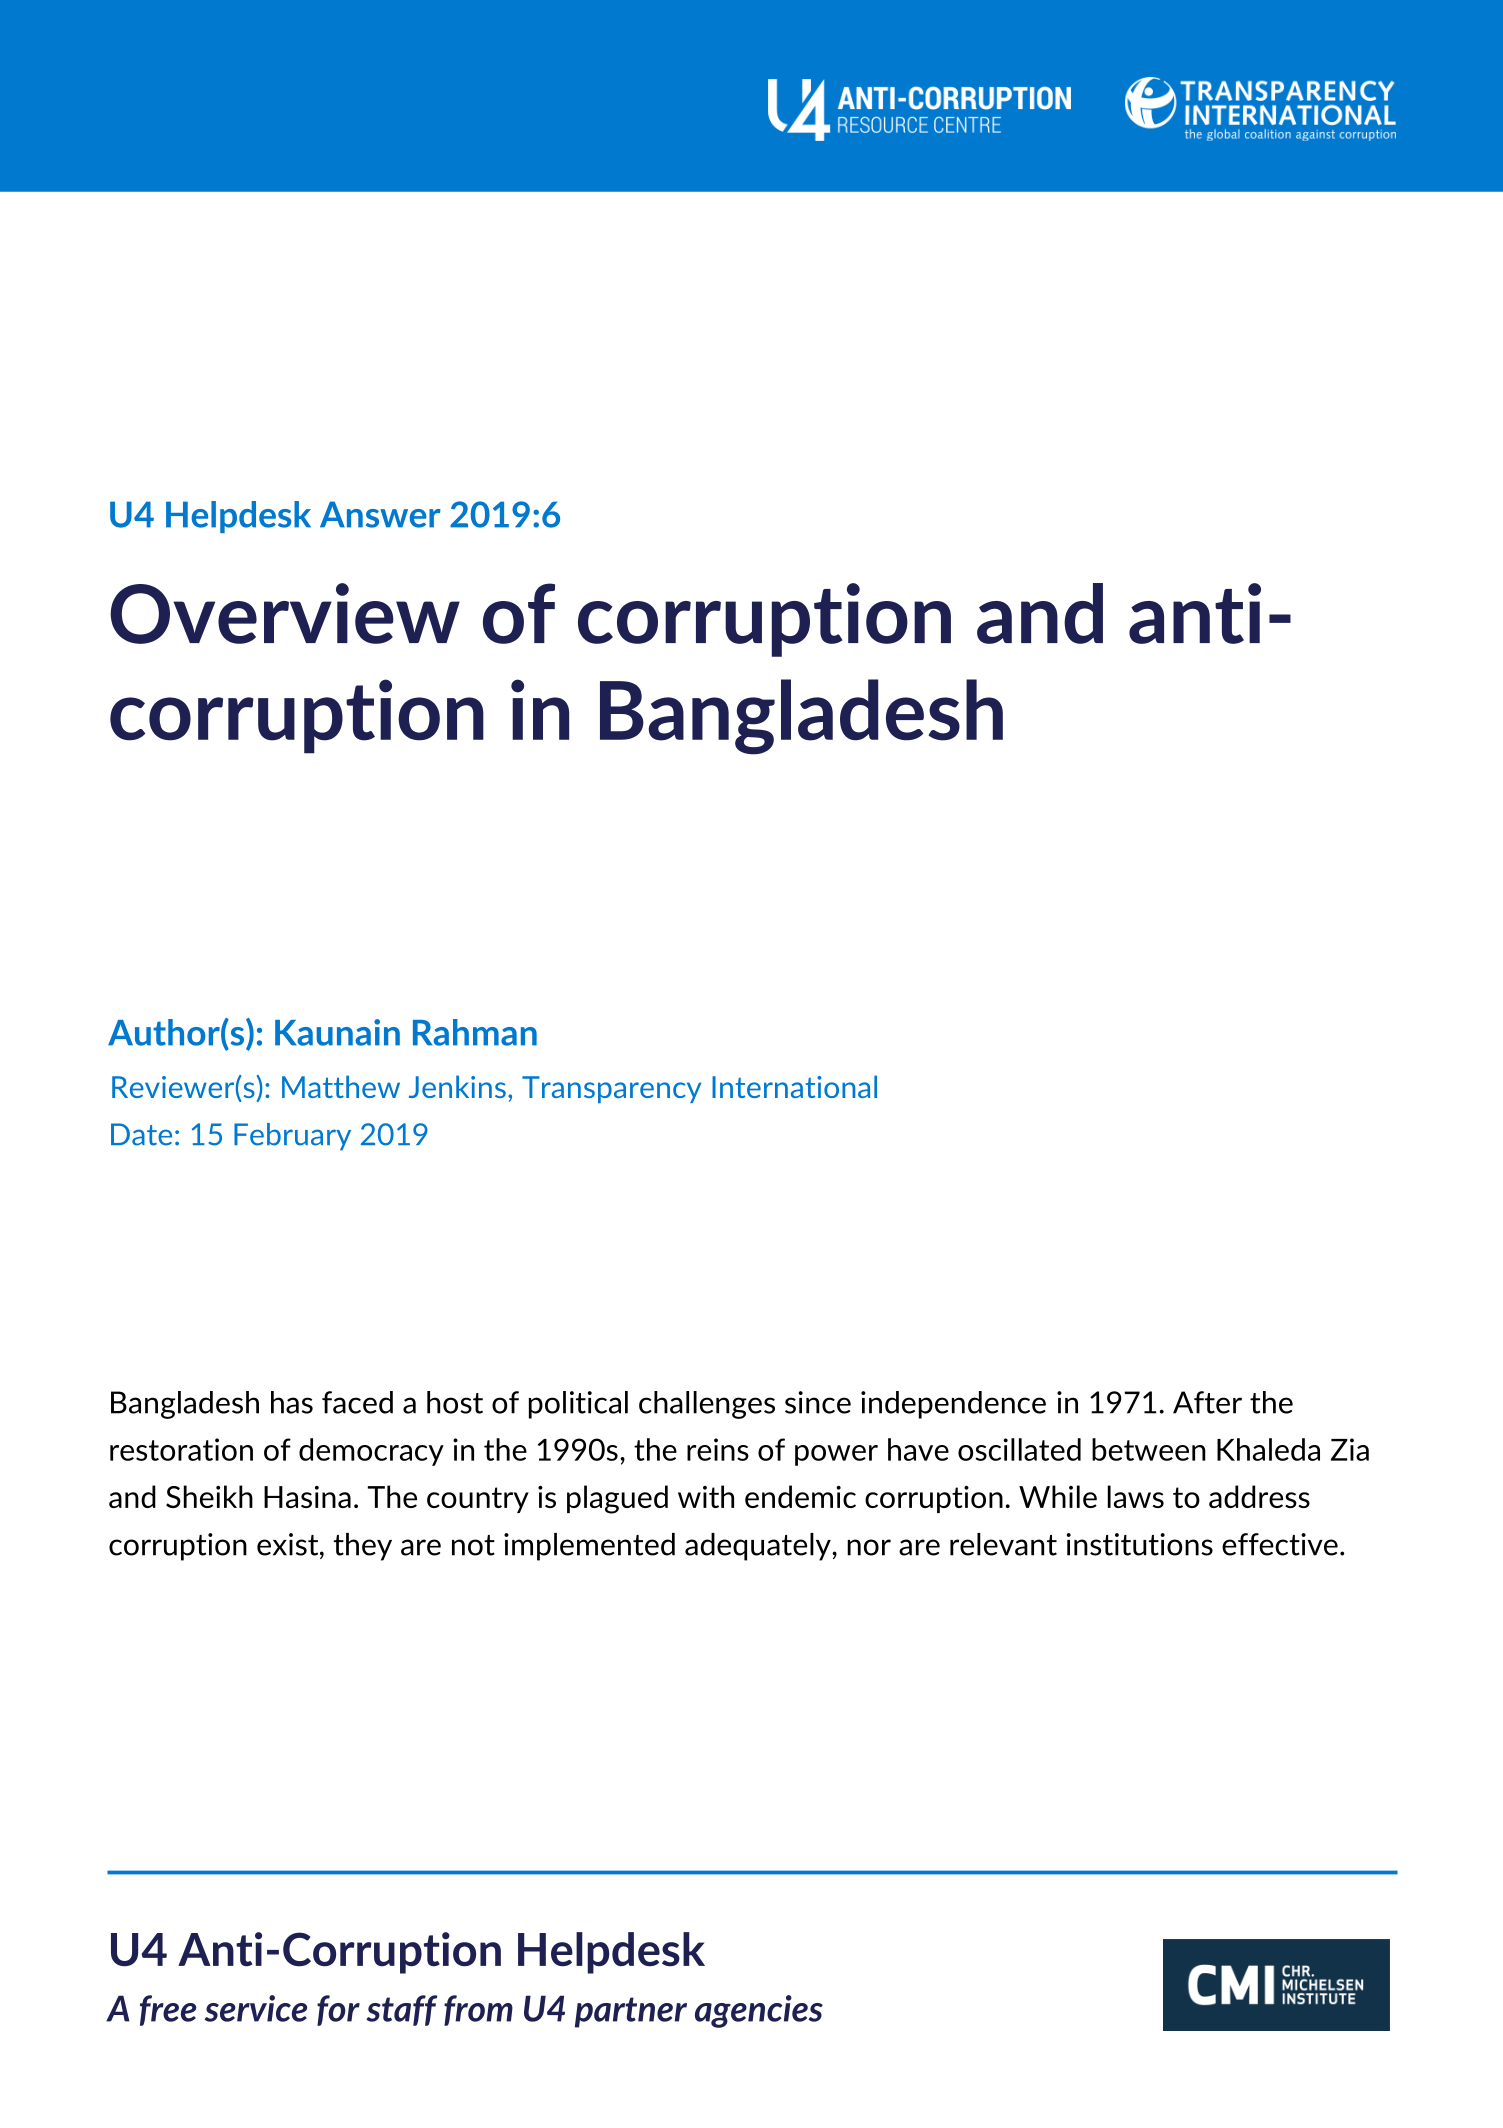 Bangladesh: Overview of corruption and anti-corruption efforts